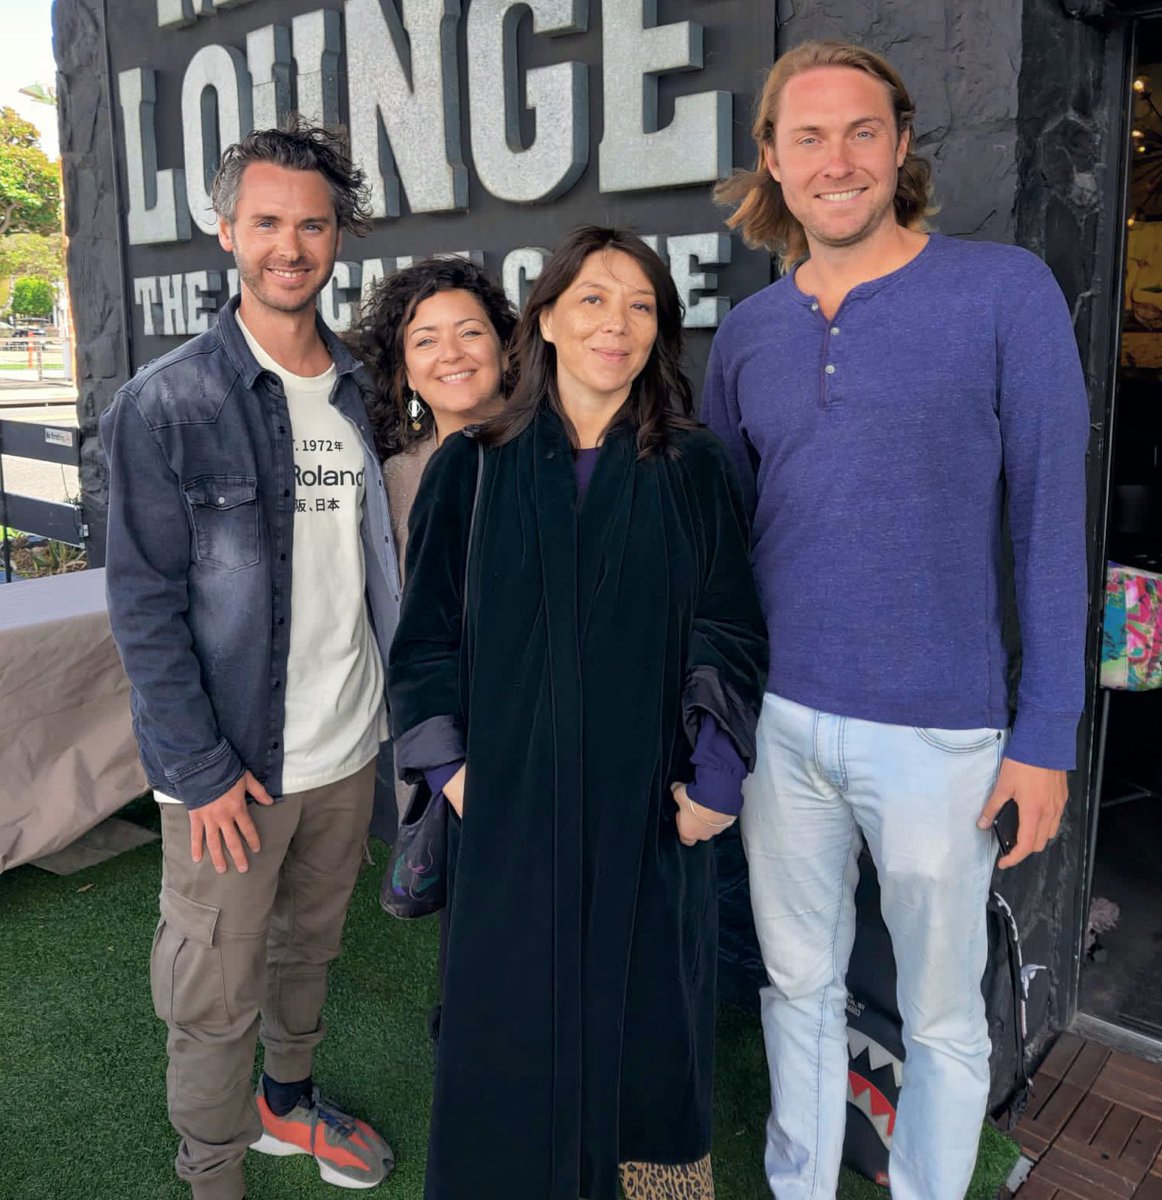 #MemberNews | Joining Belwest forces between 🇧🇪 founder and member Dominique Vanhecke and Brand Strategist Berengere Ferrier to start a new Listening Bar concept in Oceanside, CA called ‘Sound by the Sea’. Stay tuned, more news coming soon! #music #entrepreneurship #California